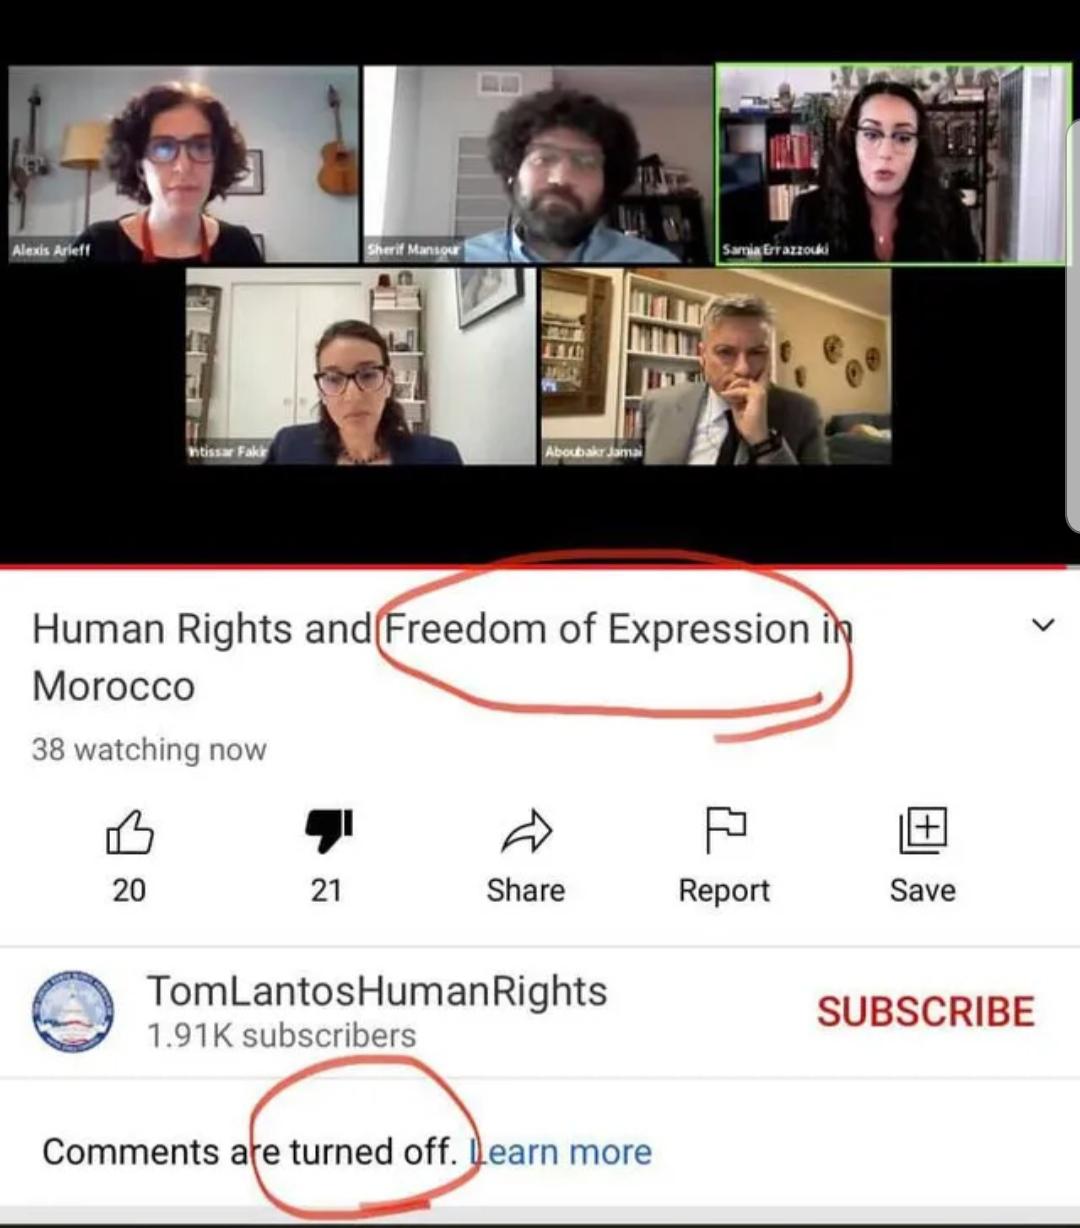 Human rights - Alexis Ariell Sherif Mansou Samia Errazzo U Intissar Fak Aboubak Jamal Human Rights and Freedom of Expression in Morocco 38 watching now 20 21 Report Save TomLantos Human Rights subscribers Subscribe are turned off. Learn more